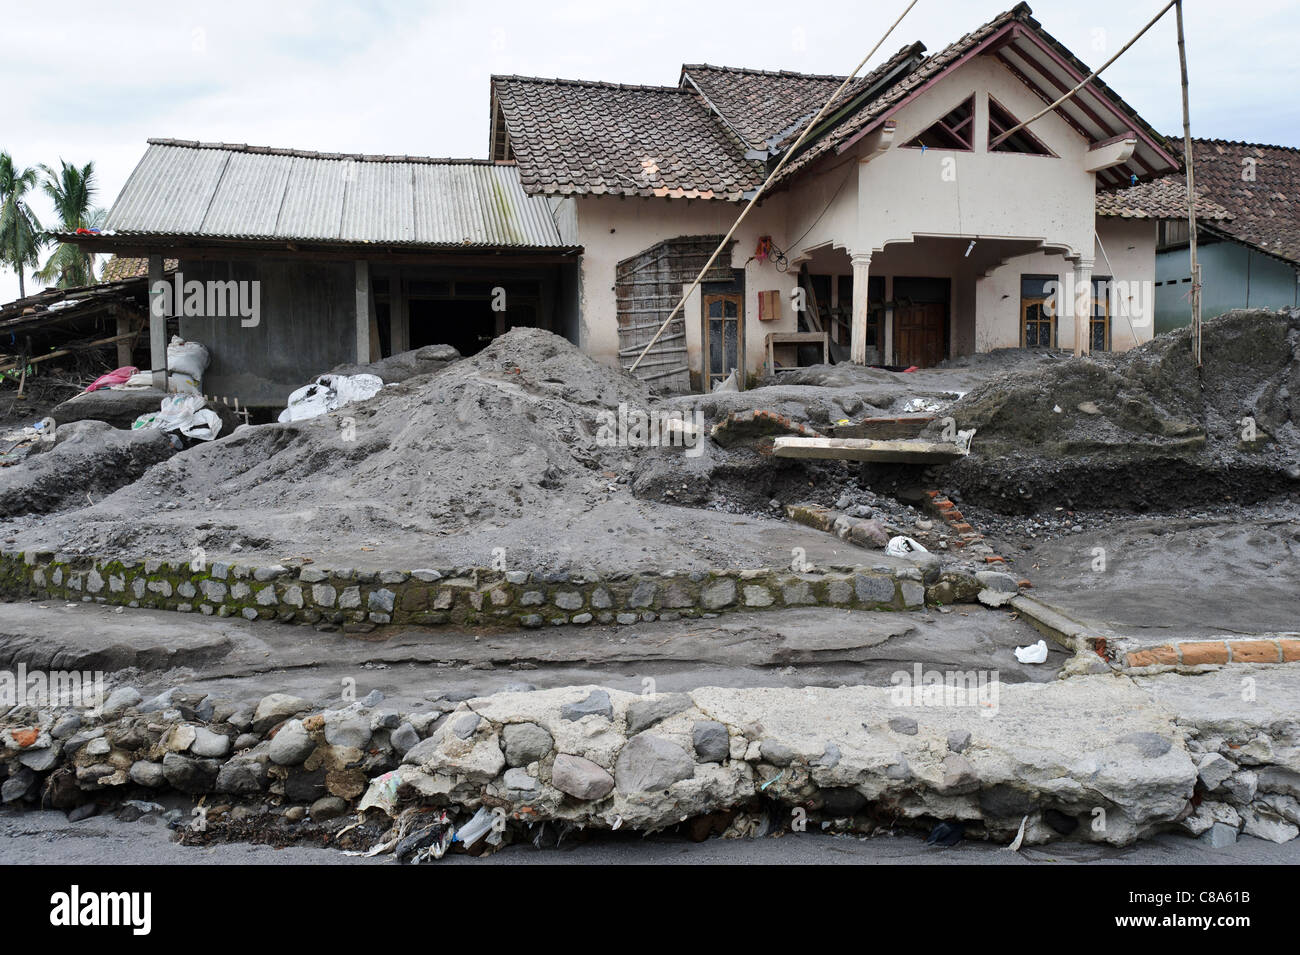 A house badly damaged by a lahar mud flow in March 2011, Sirahan, Magelang, Yogyakarta, Java, Indonesia. Stock Photo